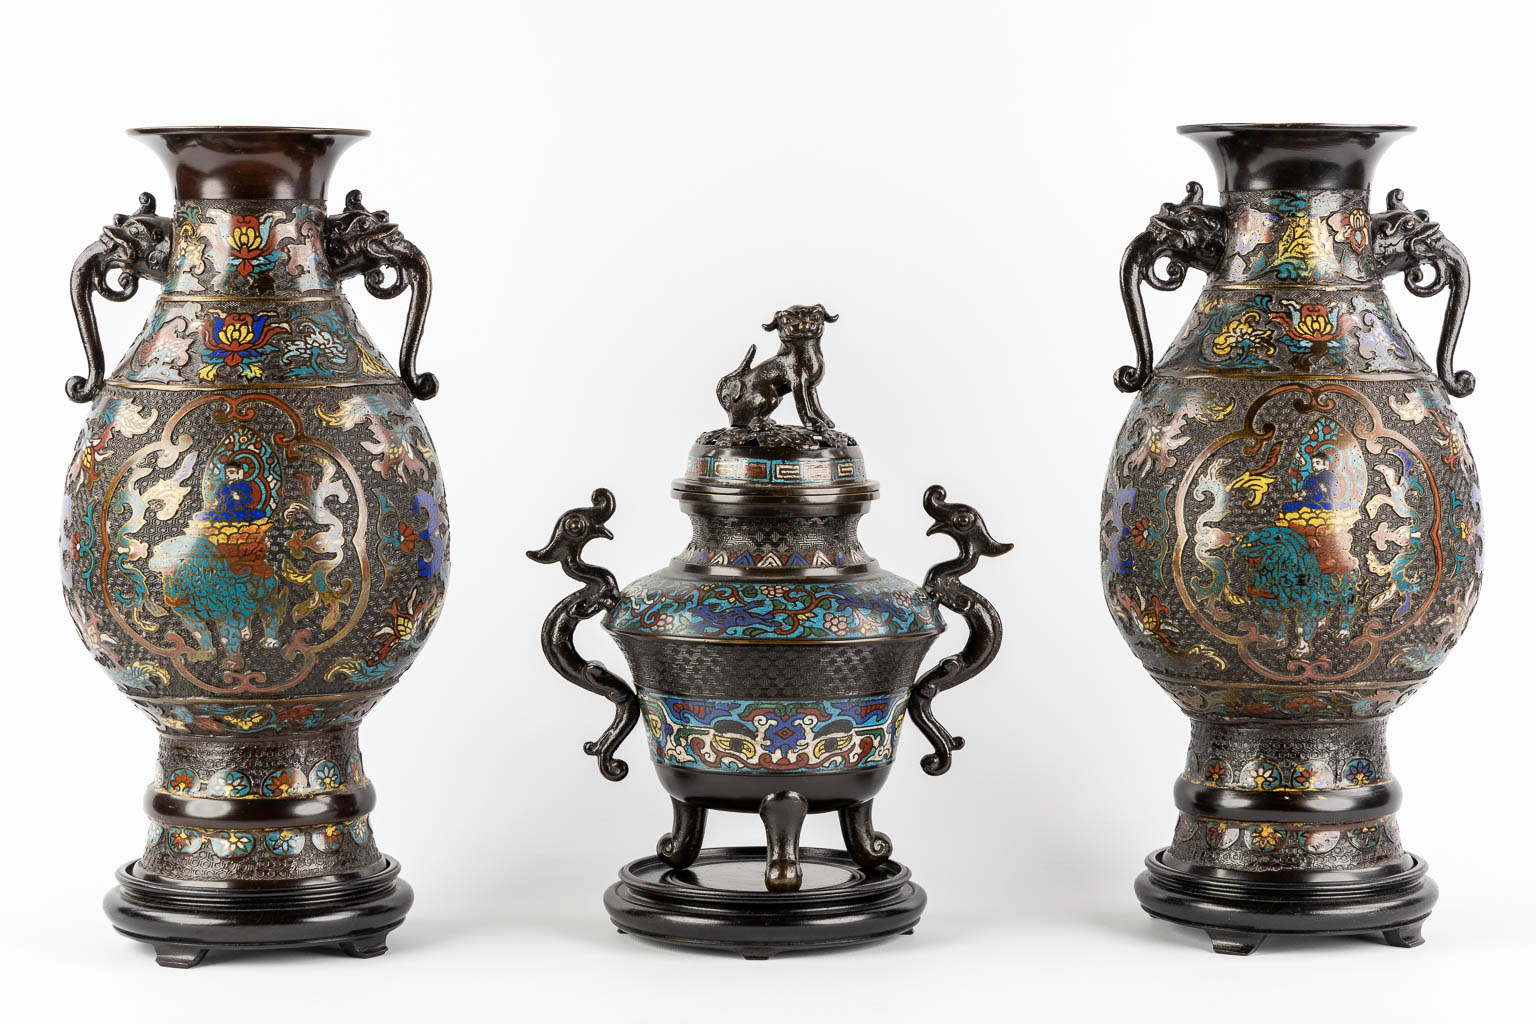 A pair of vases, added an insence burner, bronze with champslevé decor. Circa 1900. (H:45 x D:23 cm)